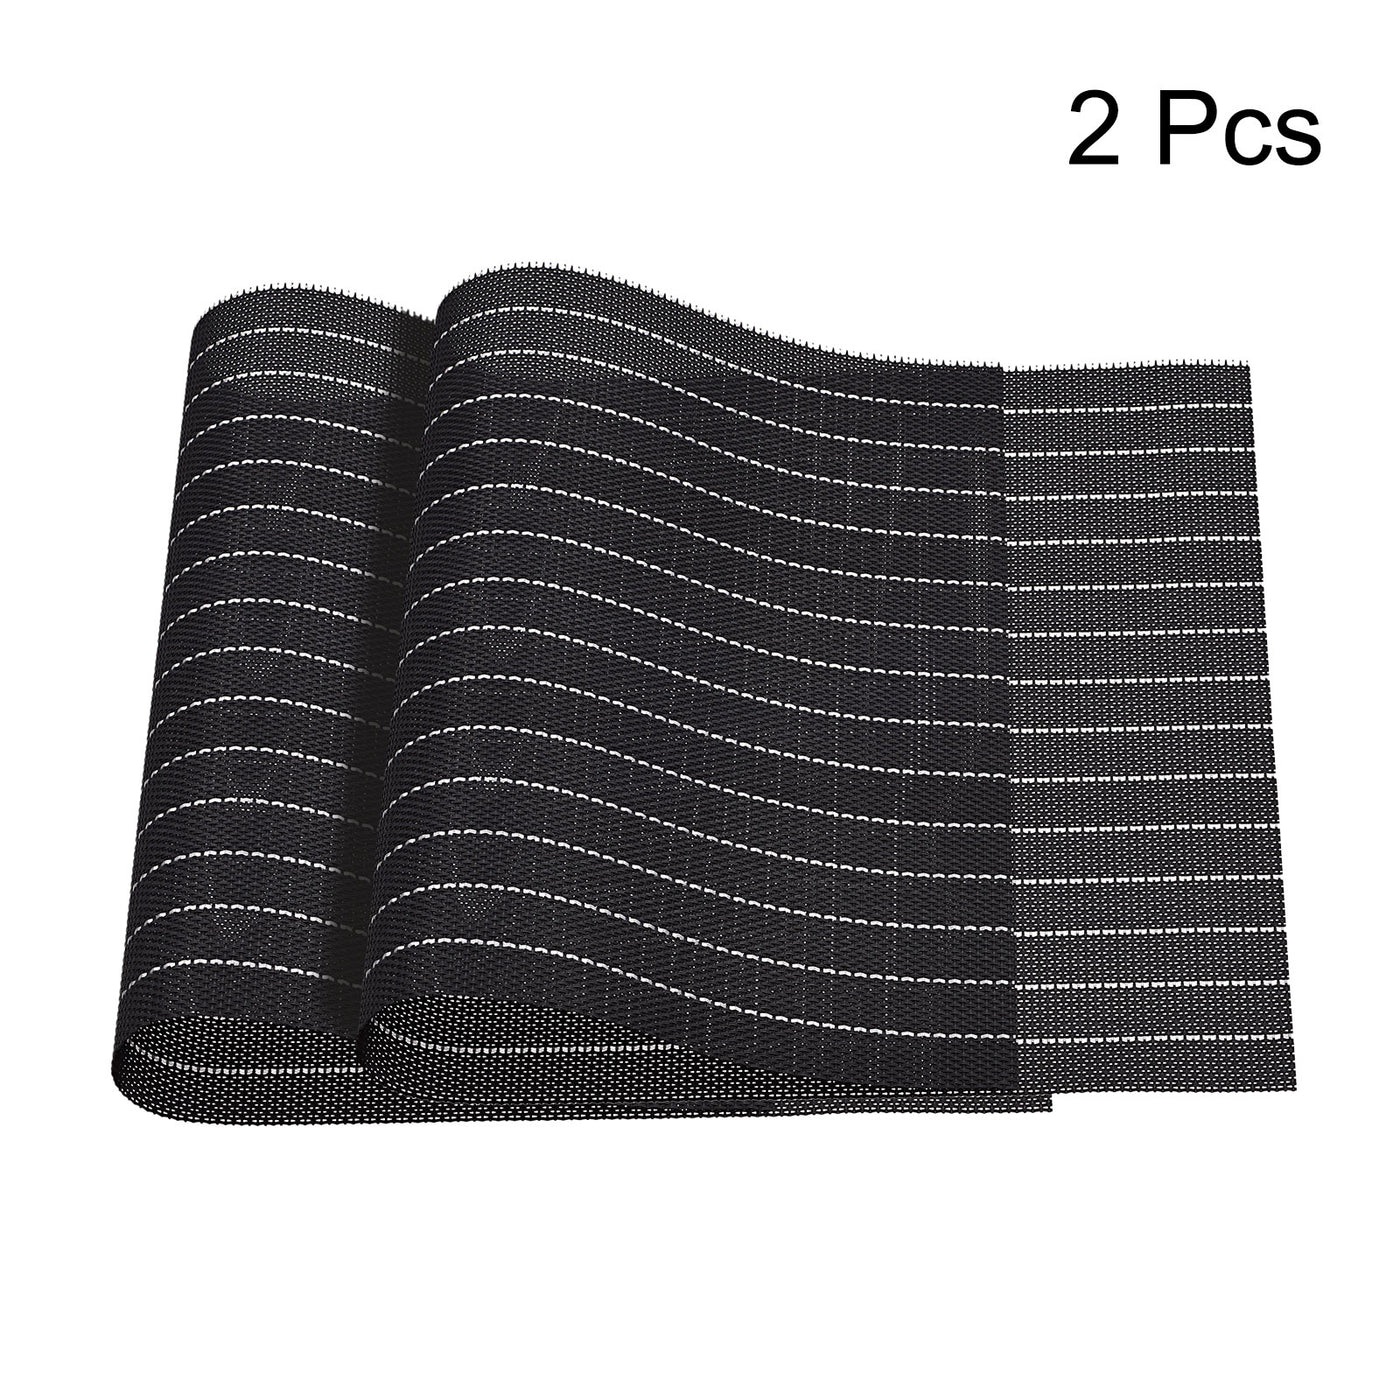 uxcell Uxcell Place Mats, 450x300mm Table Mats Set of 2 PVC Washable Woven Placemat Black